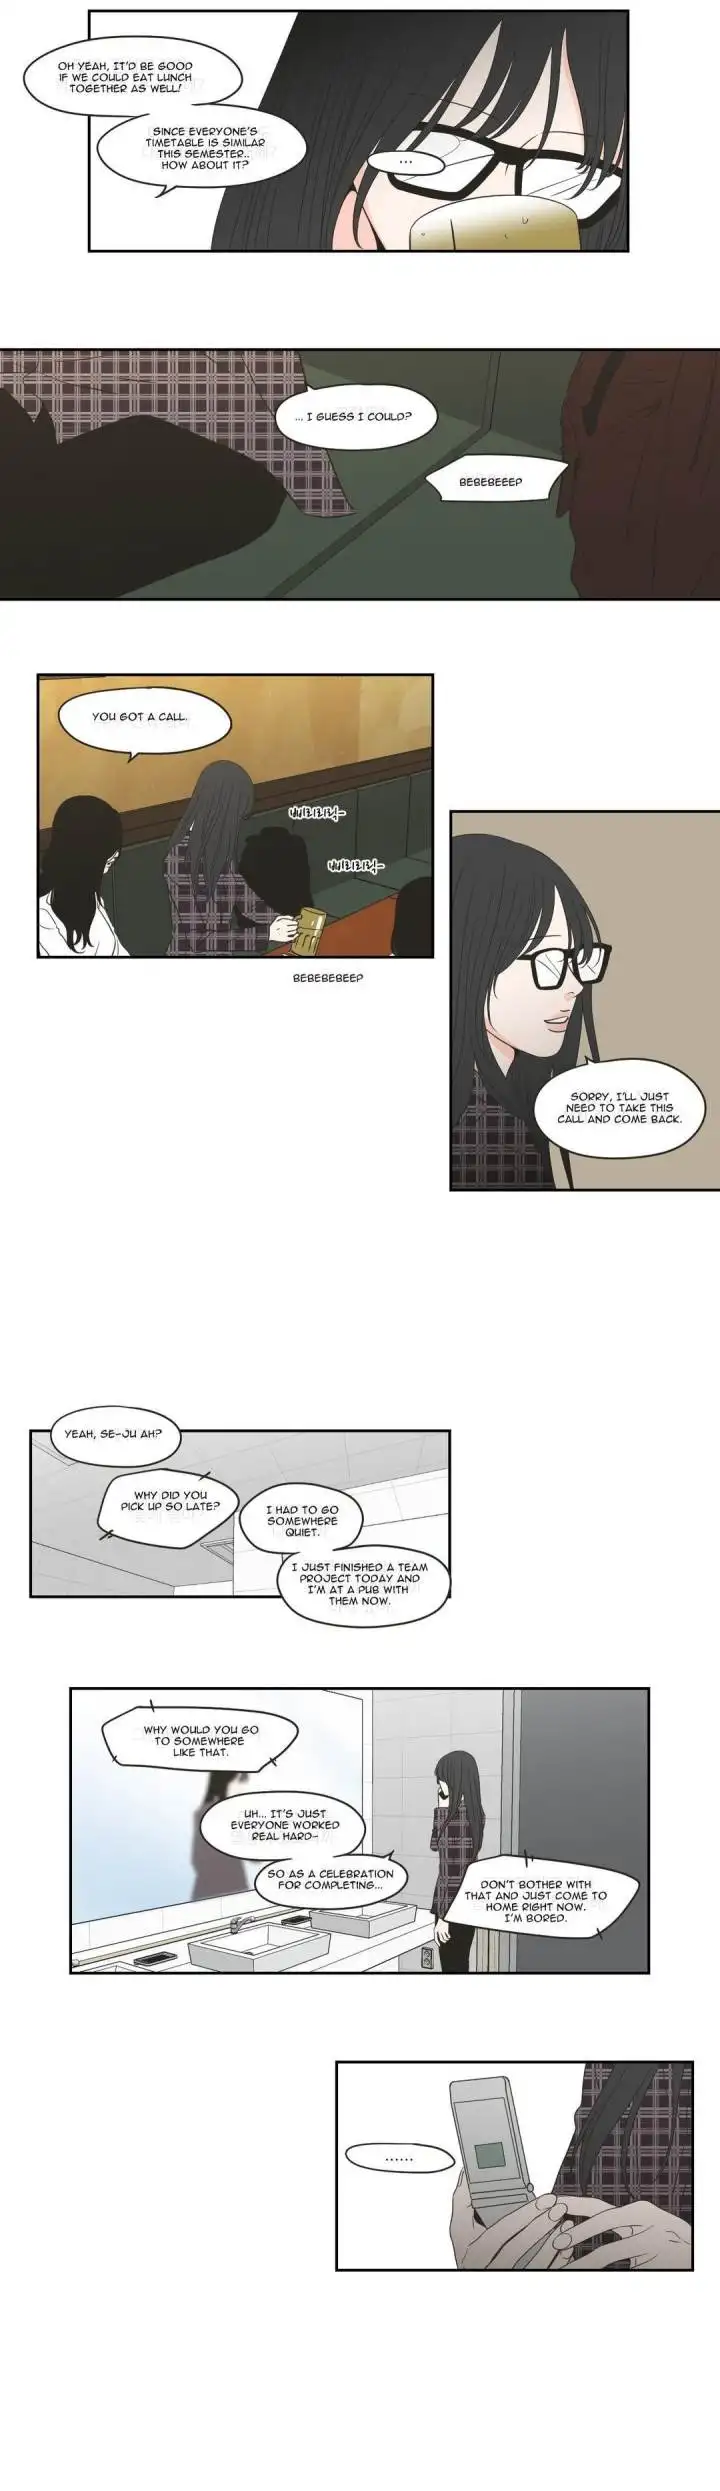 What Does the Fox Say? - Chapter 99 Page 7